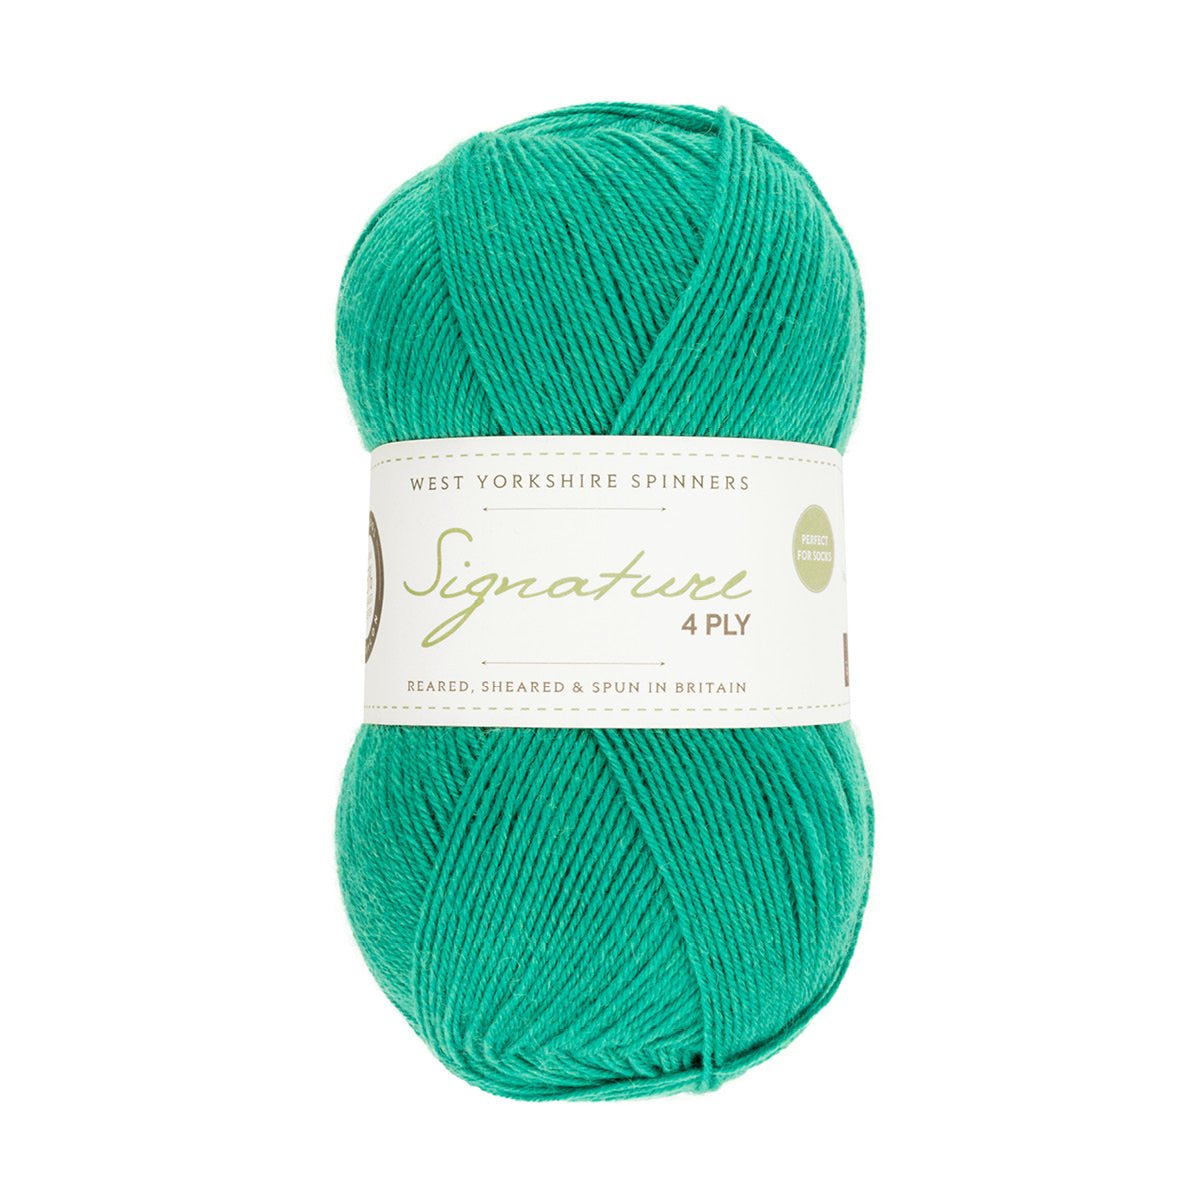 SIGNATURE 4PLY 333-Blue Raspberry - West Yorkshire Spinners